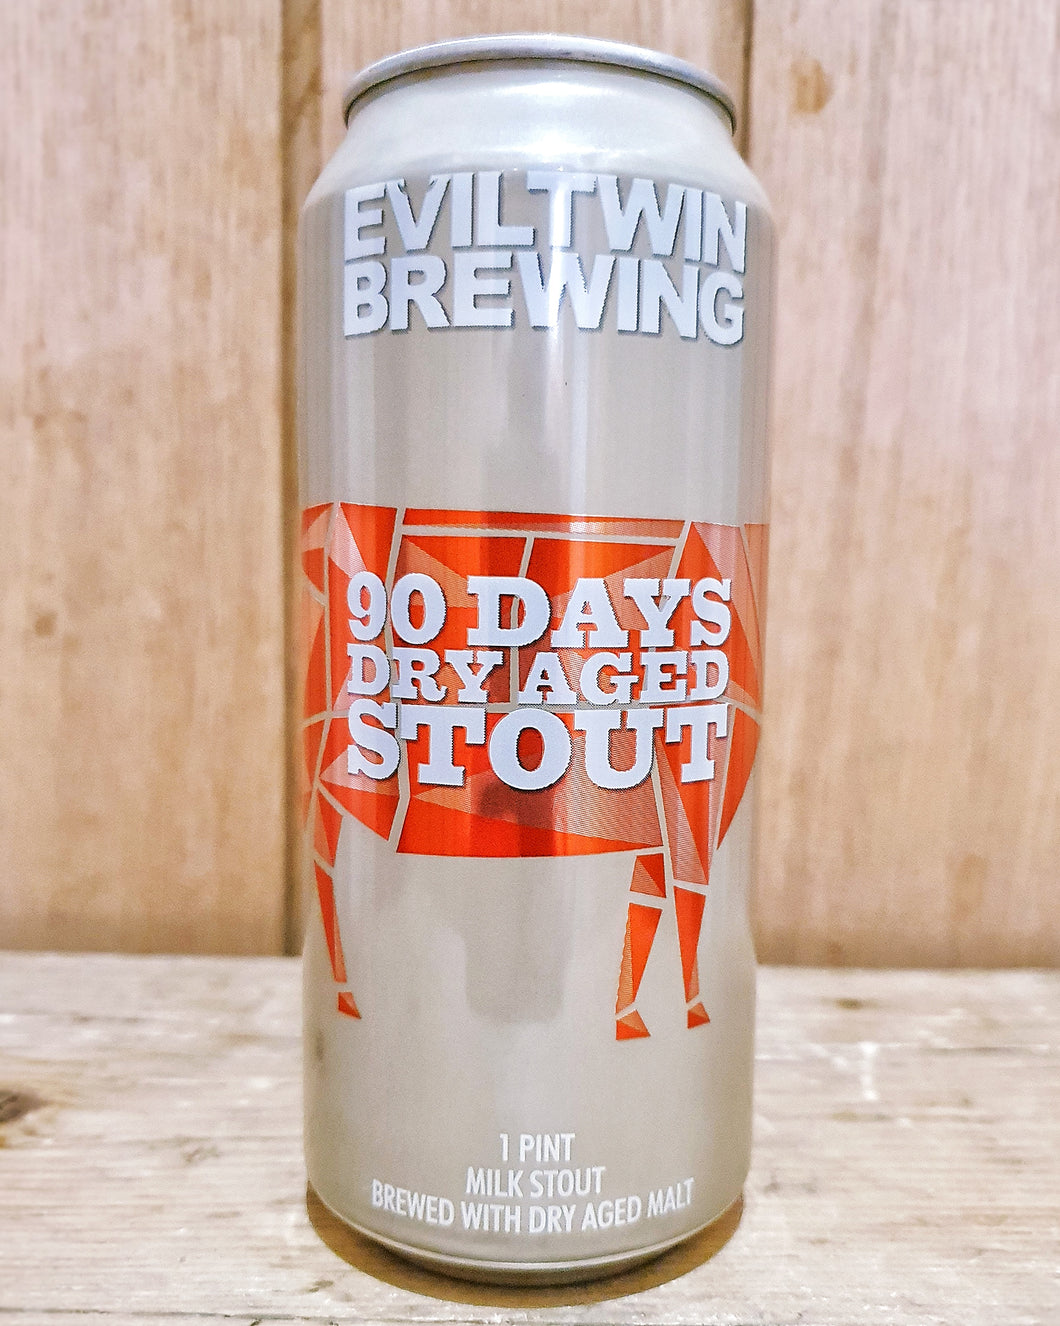 Evil Twin Brewing - 90 Days Dry Aged Stout